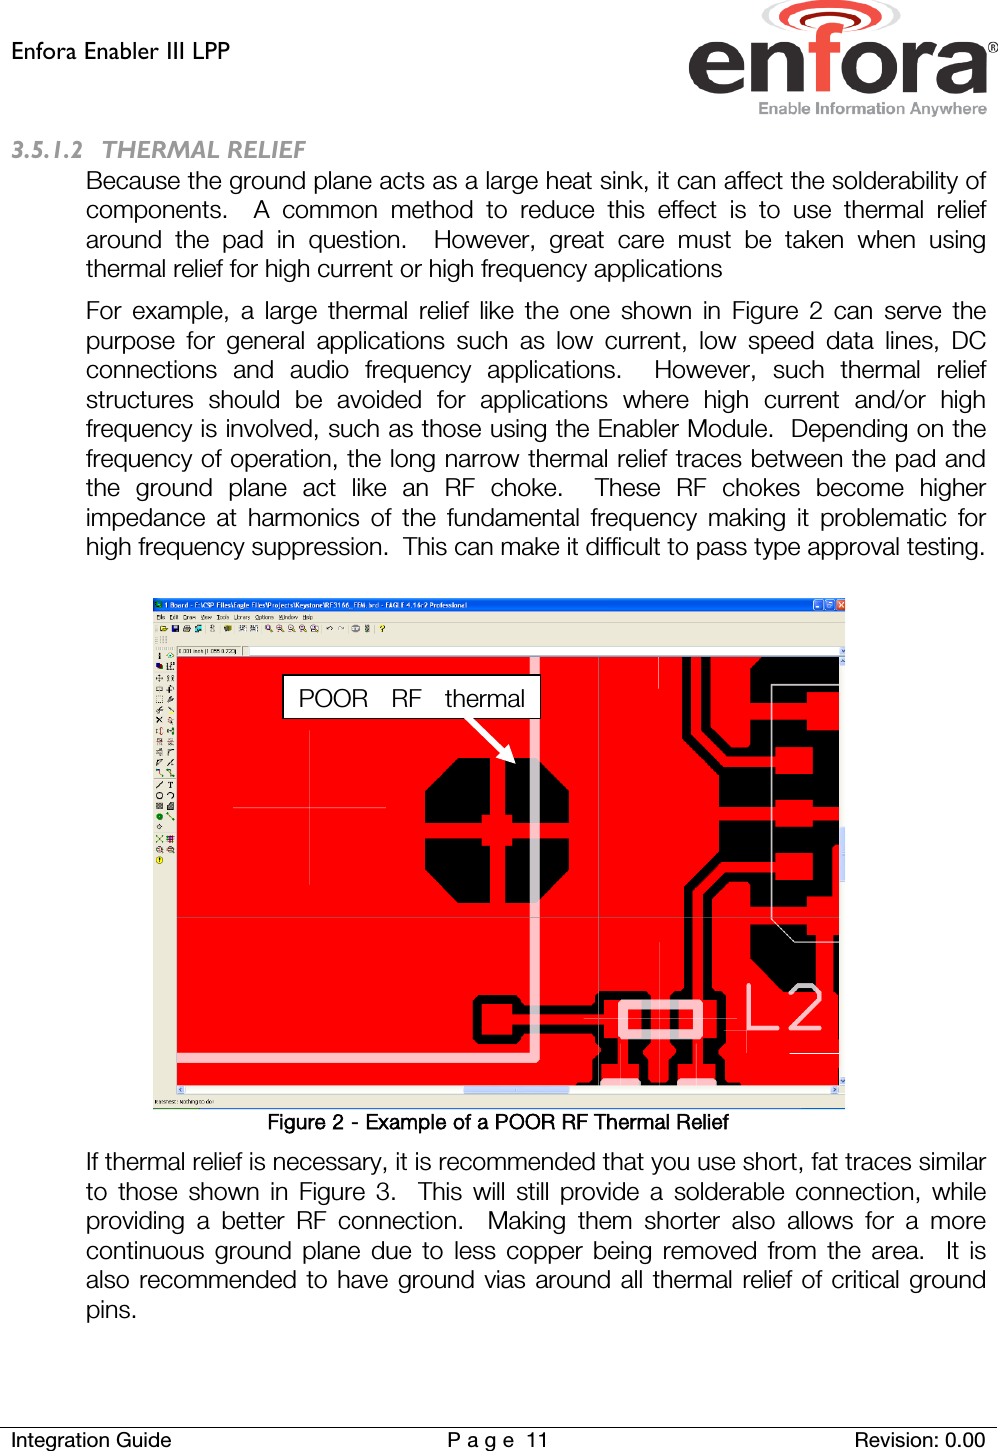 Enfora Enabler III LPP    Integration Guide Page 11 Revision: 0.00  3.5.1.2 THERMAL RELIEF Because the ground plane acts as a large heat sink, it can affect the solderability of components.  A common method to reduce this effect is to use thermal relief around the pad in question.  However, great care must be taken when using thermal relief for high current or high frequency applications For example, a large thermal relief like the one shown in Figure 2 can serve the purpose for general applications such as low current, low speed data lines, DC connections and audio frequency applications.  However, such thermal relief structures should be avoided for applications where high current and/or high frequency is involved, such as those using the Enabler Module.  Depending on the frequency of operation, the long narrow thermal relief traces between the pad and the ground plane act like an RF choke.  These RF chokes become higher impedance at harmonics of the fundamental frequency making it problematic for high frequency suppression.  This can make it difficult to pass type approval testing.   Figure 2 - Example of a POOR RF Thermal Relief If thermal relief is necessary, it is recommended that you use short, fat traces similar to those shown in Figure  3.  This will still provide a solderable connection, while providing a better RF connection.  Making them shorter also allows for a more continuous ground plane due to less copper being removed from the area.  It is also recommended to have ground vias around all thermal relief of critical ground pins.  POOR RF thermal  